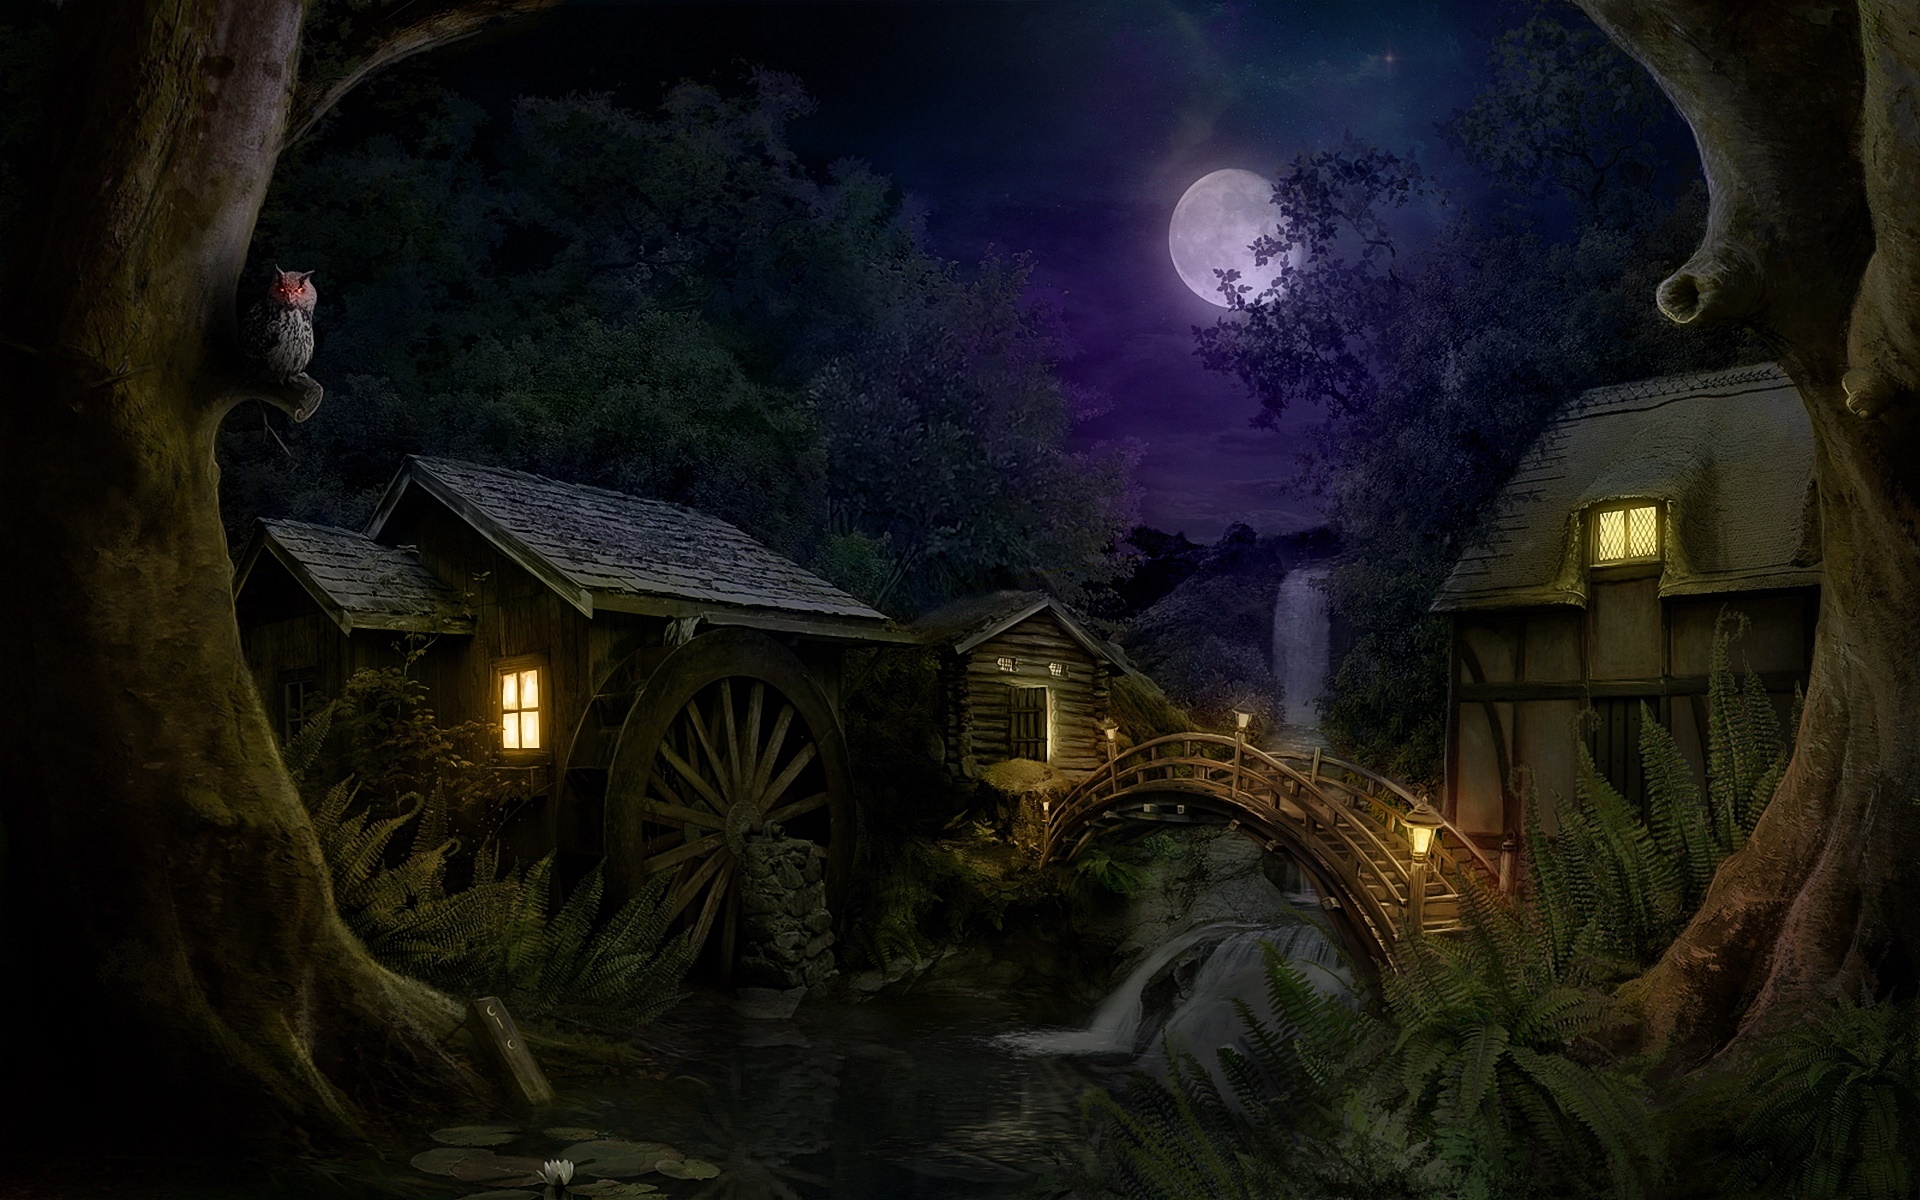 Watermill under the Moonlight: A serene scene of a watermill bathed in moonlight.